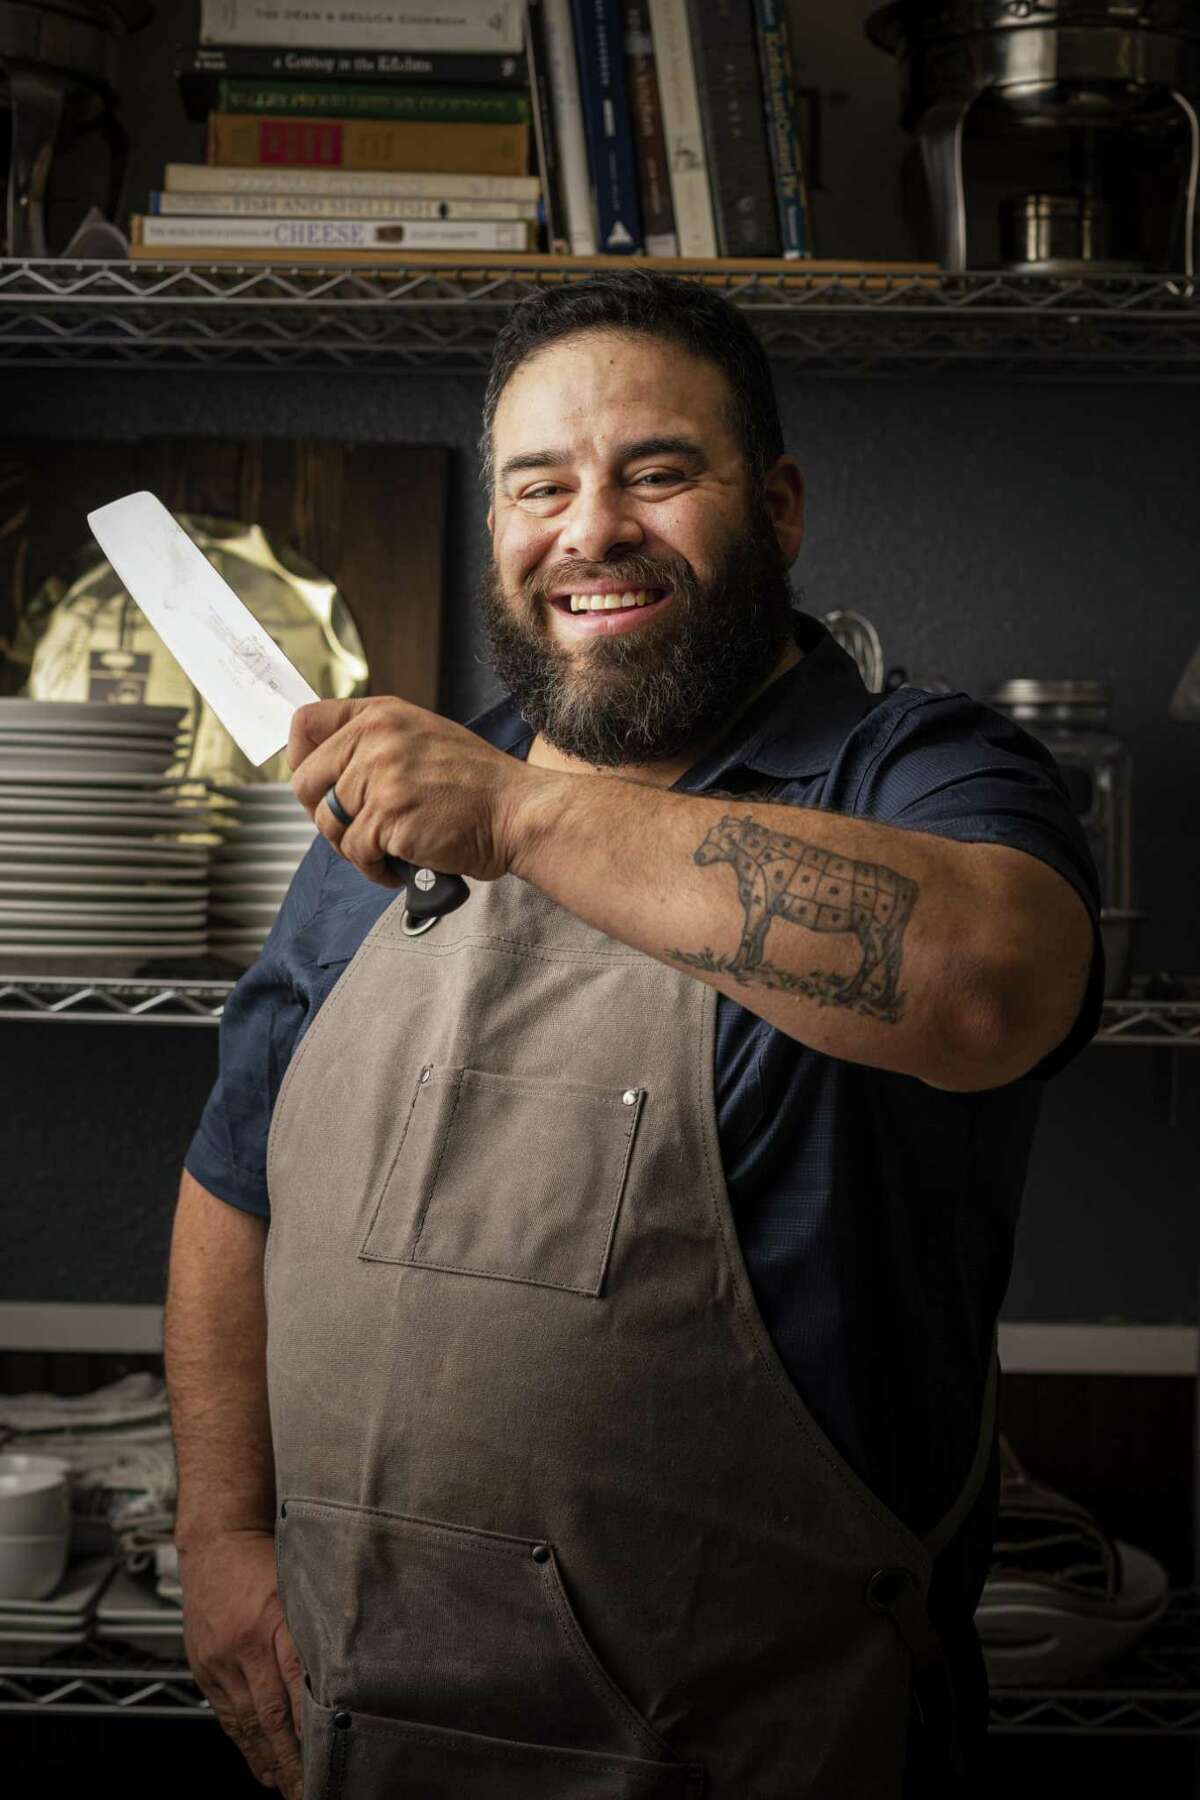 Andy Lugo, a trained chef and butcher, developed a knack for trimming briskets while working at Cooper’s Meat Market. He now runs his own business out of his home, servicing competition barbecue cooks.